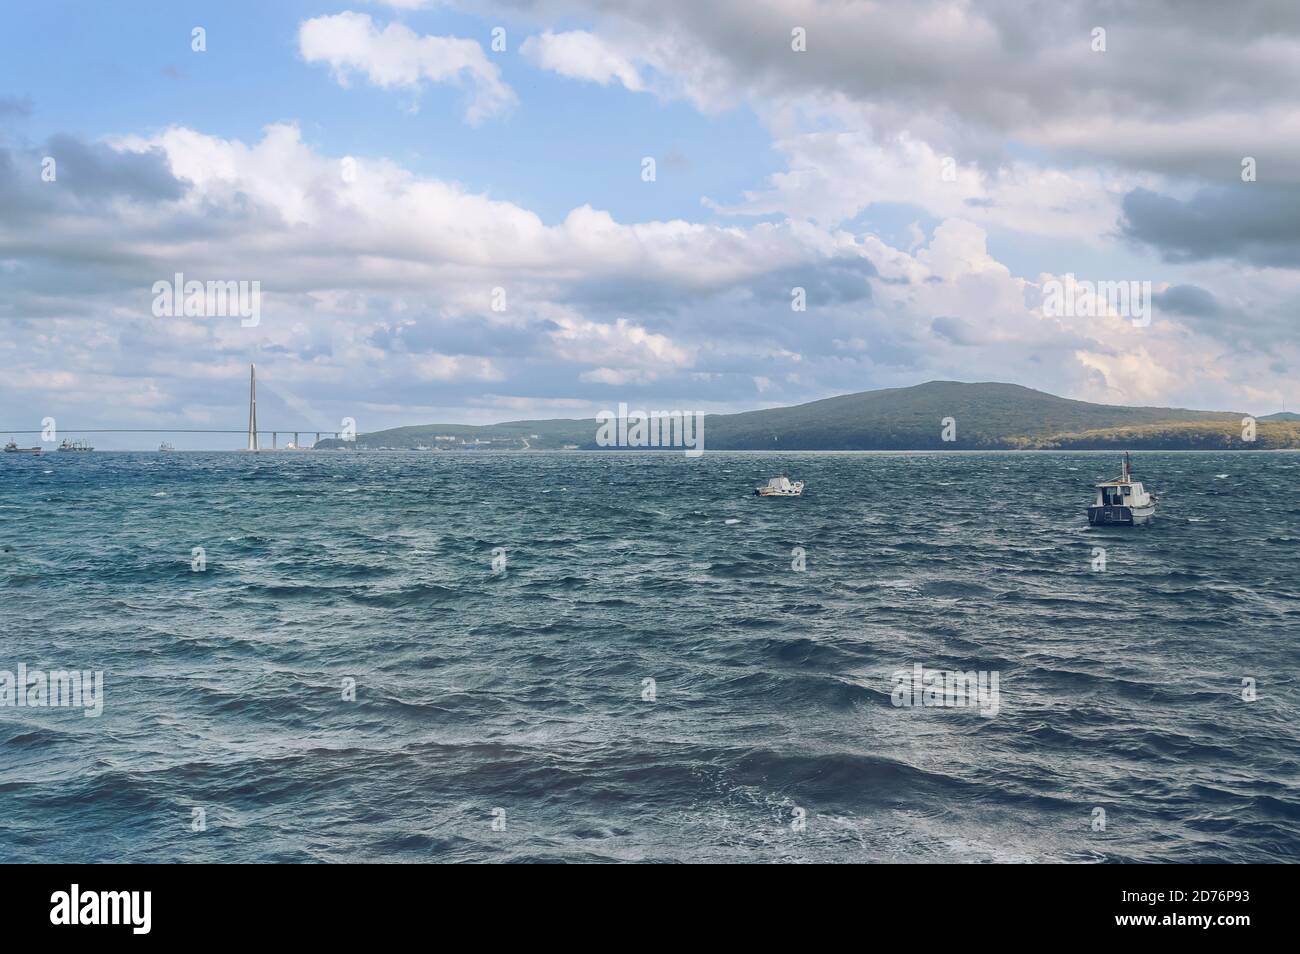 restless sea with boats,part of  Russkiy bridge and russkiy island on background Stock Photo